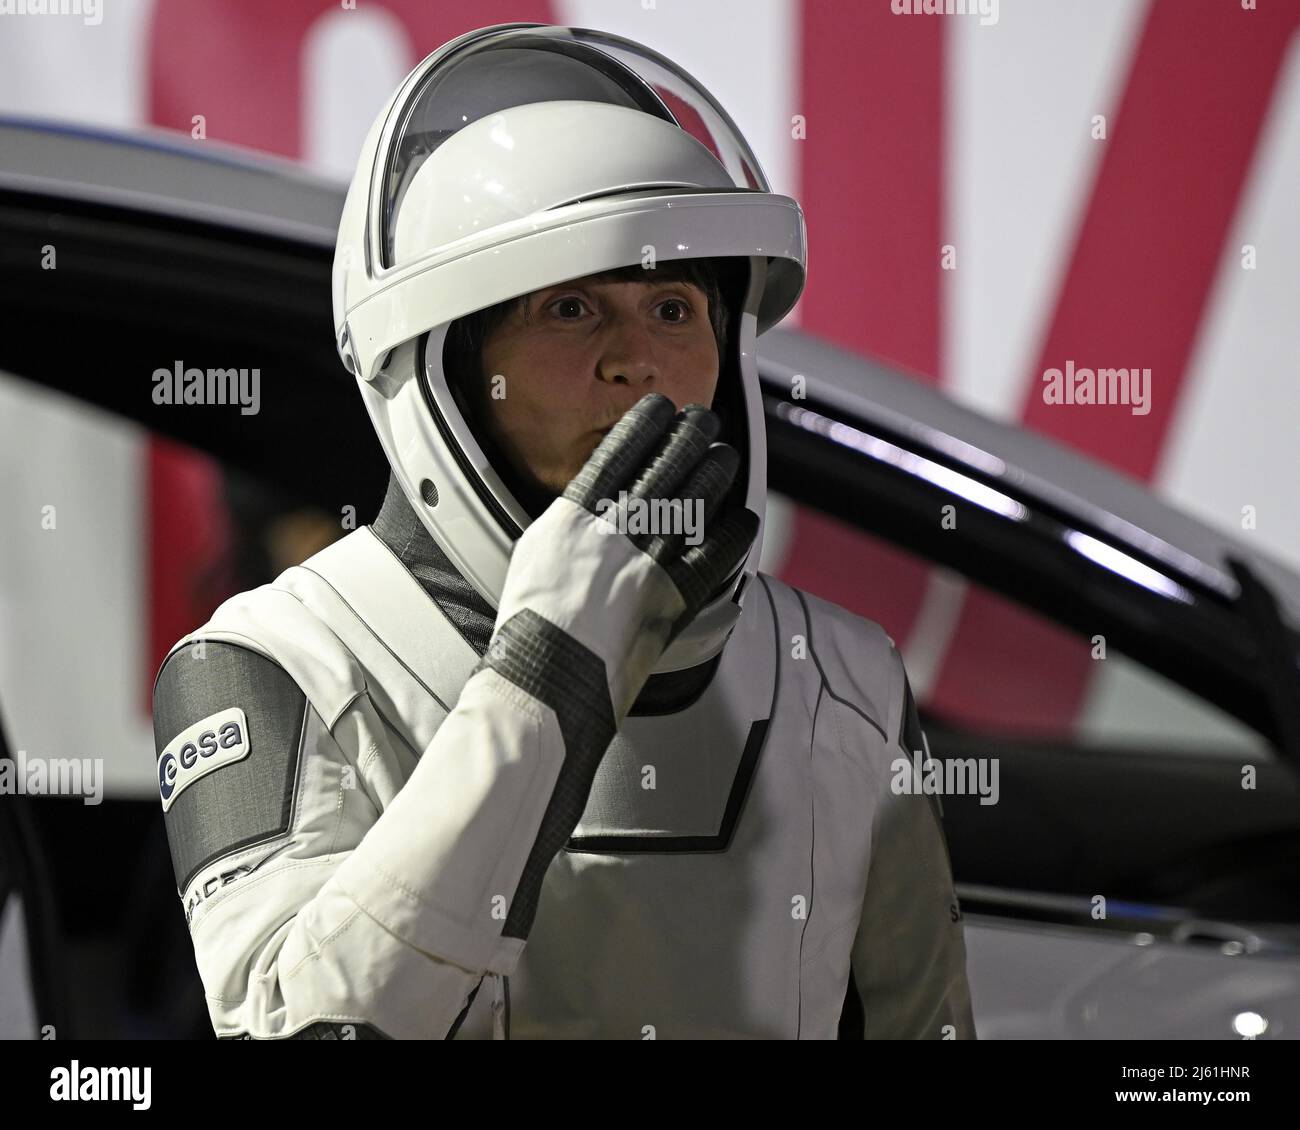 ESA Astronaut Samantha Cristoforetti, blows a kiss to family members after walking out of the Neil Armstrong O&C Building at the the Kennedy Space Center, Florida on Wednesday, April 27, 2022. Photo by Joe Marino/UPI Credit: UPI/Alamy Live News Stock Photo